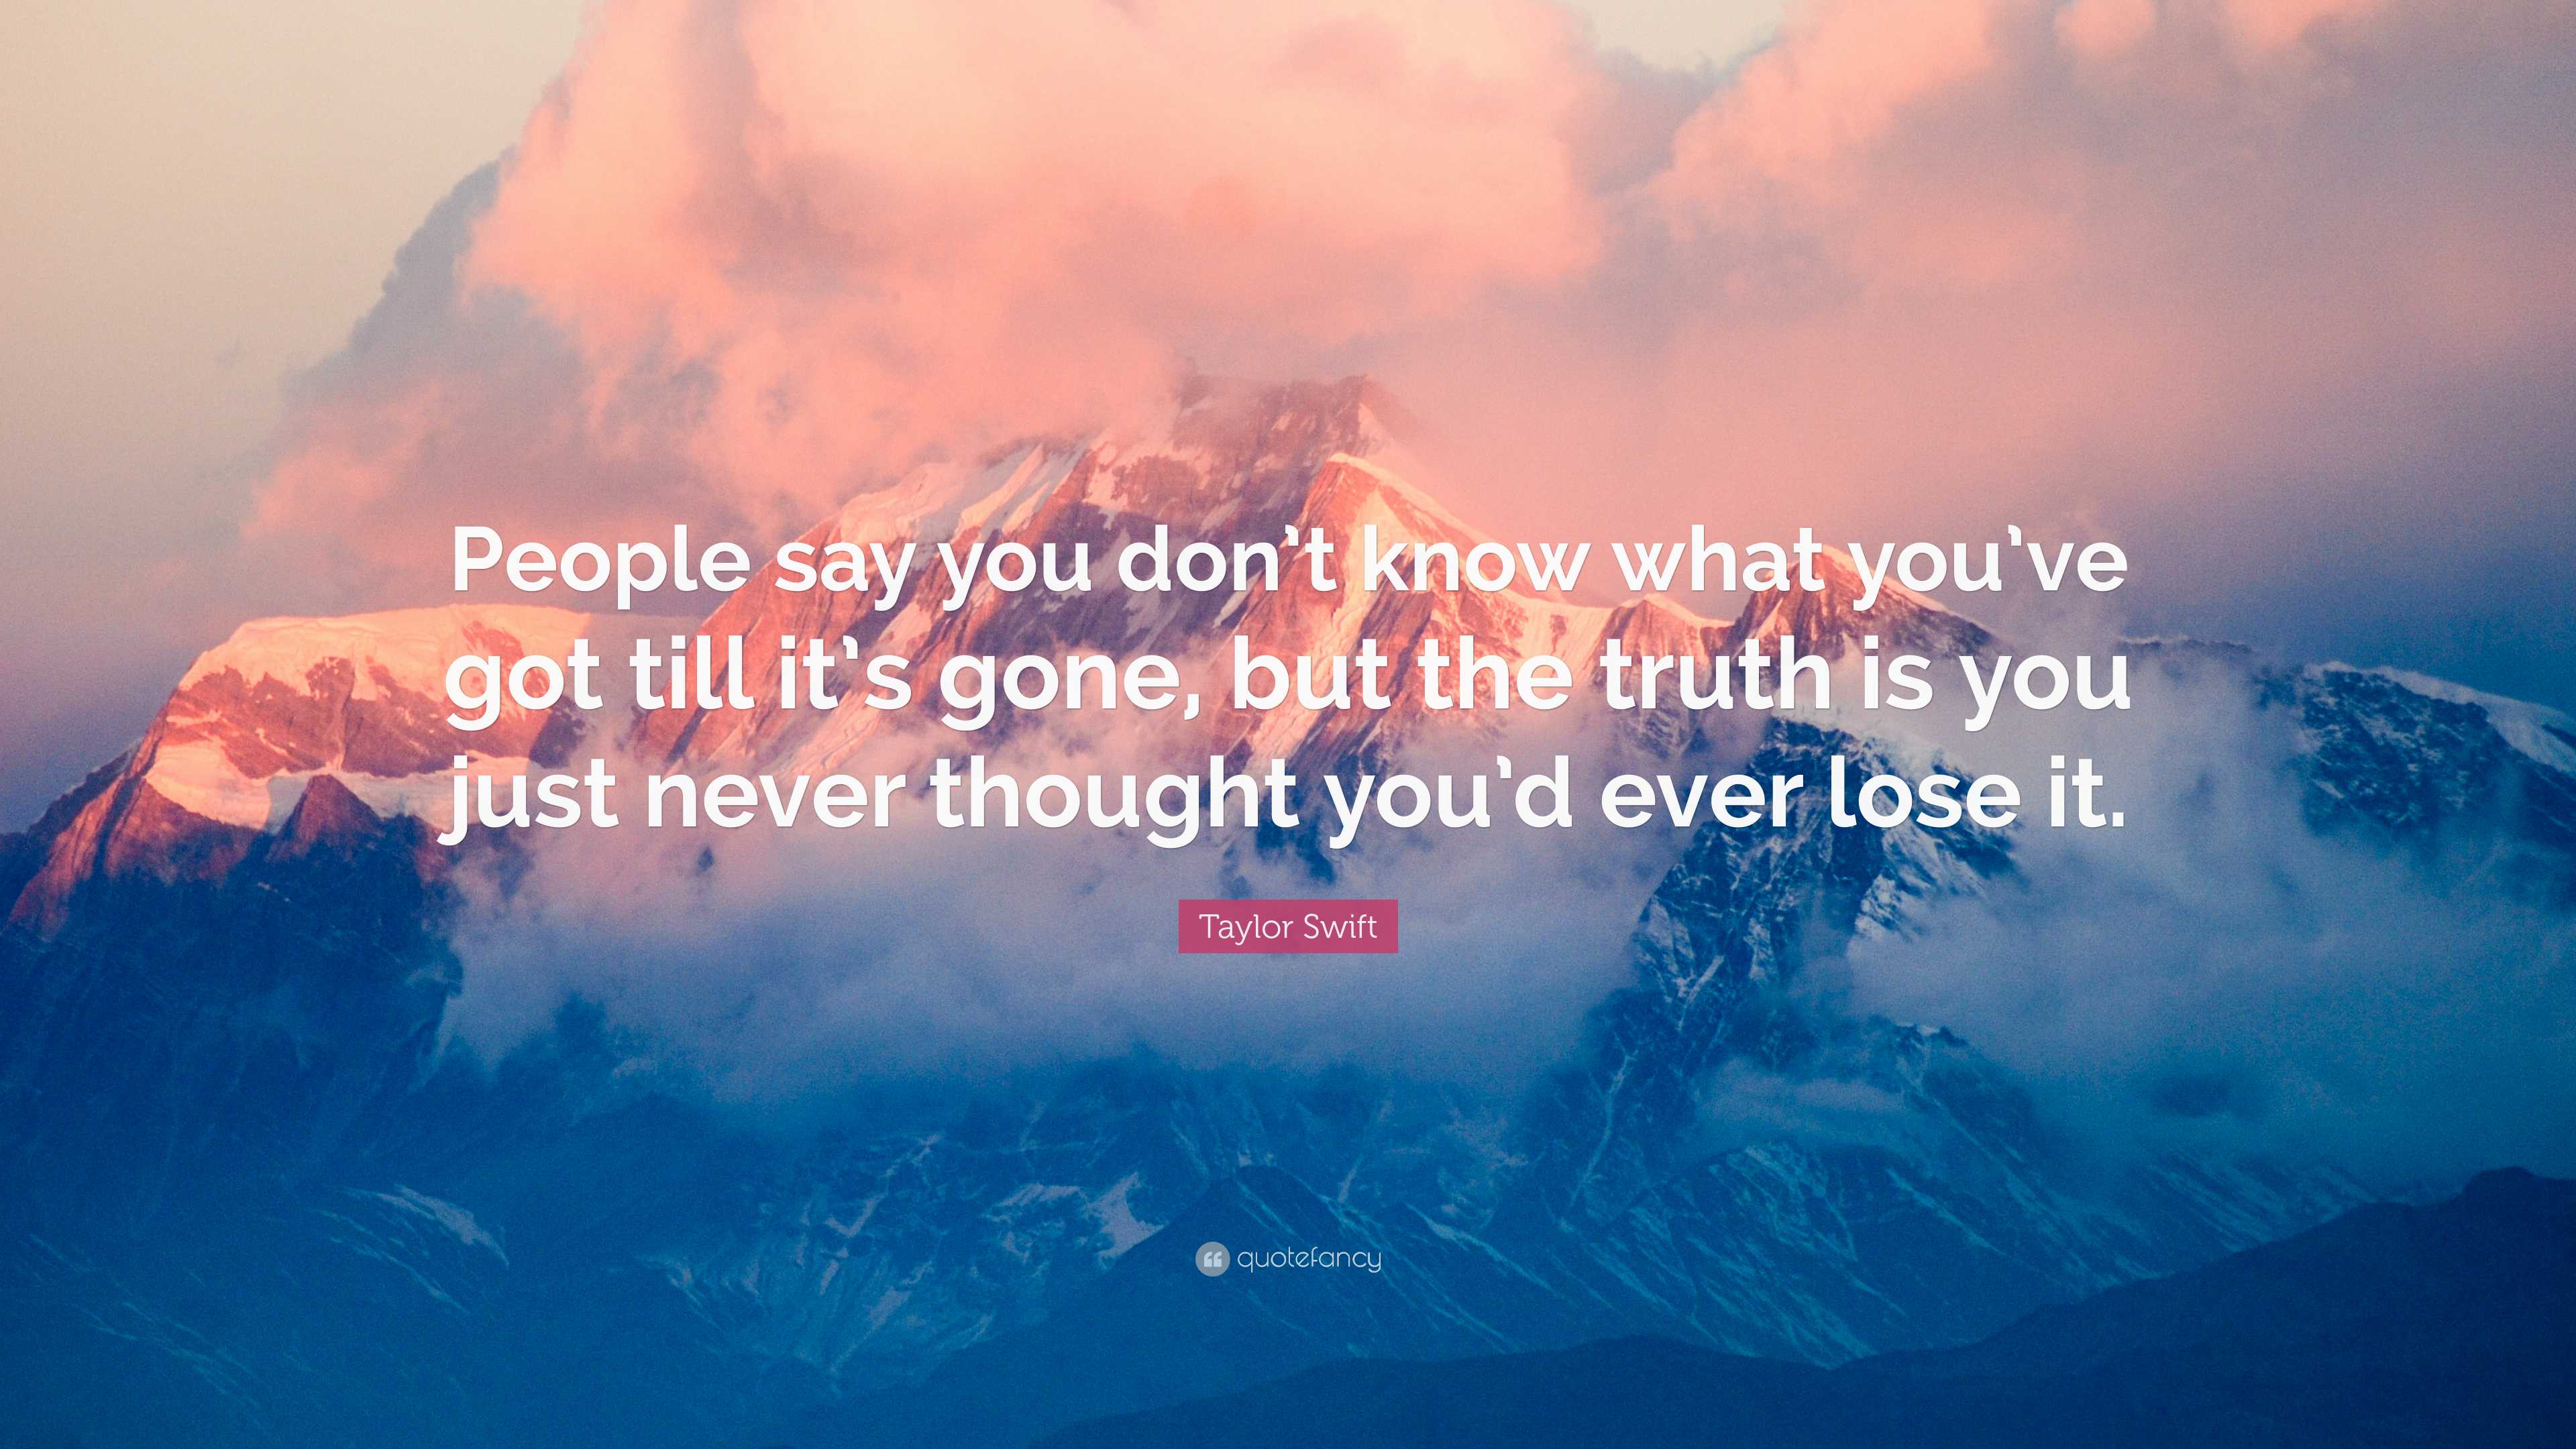 Taylor Swift Quote: “People say you don’t know what you’ve got till it ...